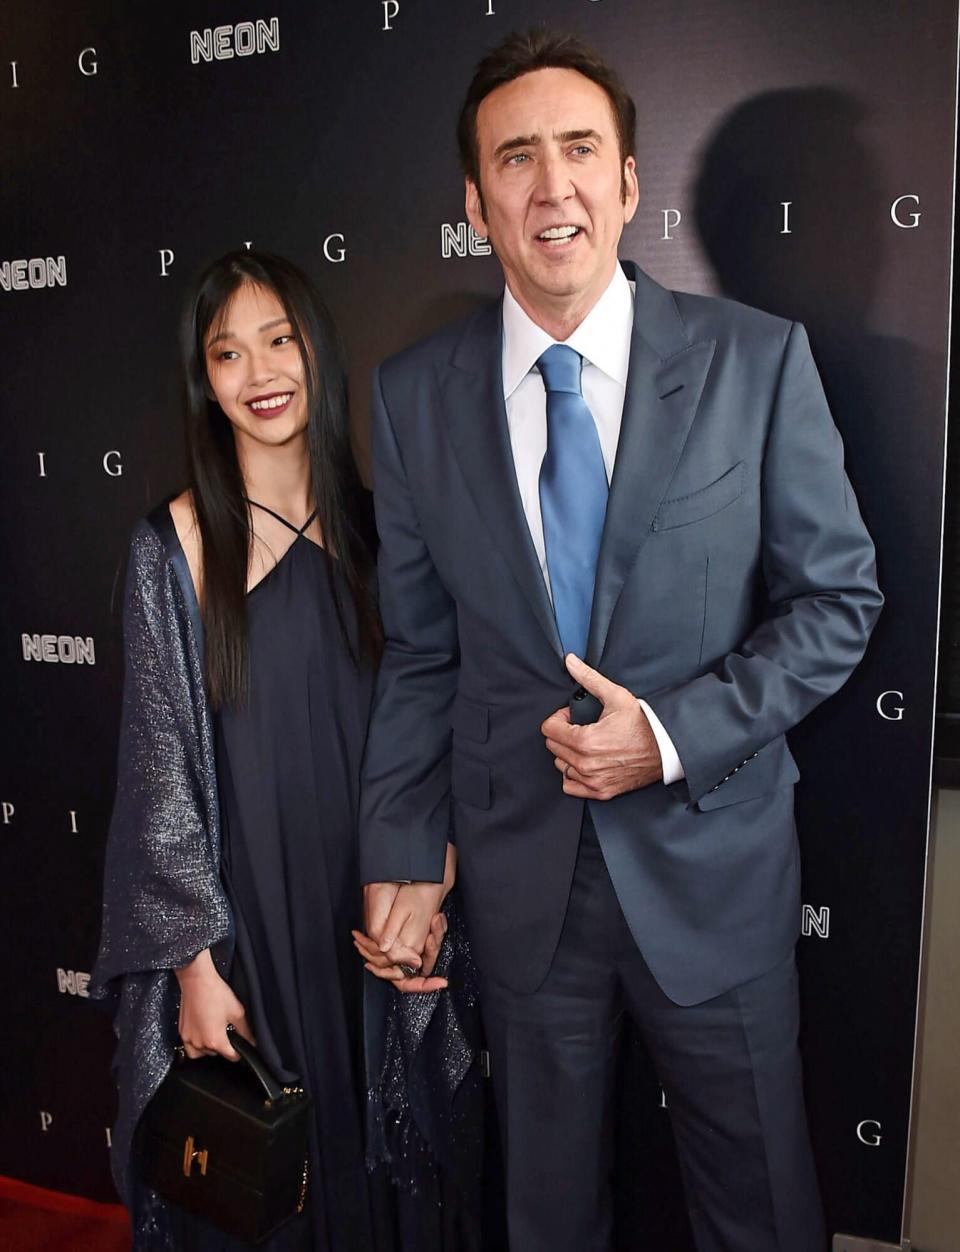 Nicolas Cage And Wife, Riko Shibata Are Expecting Their First Child TogetherDebut at Pig Premiere